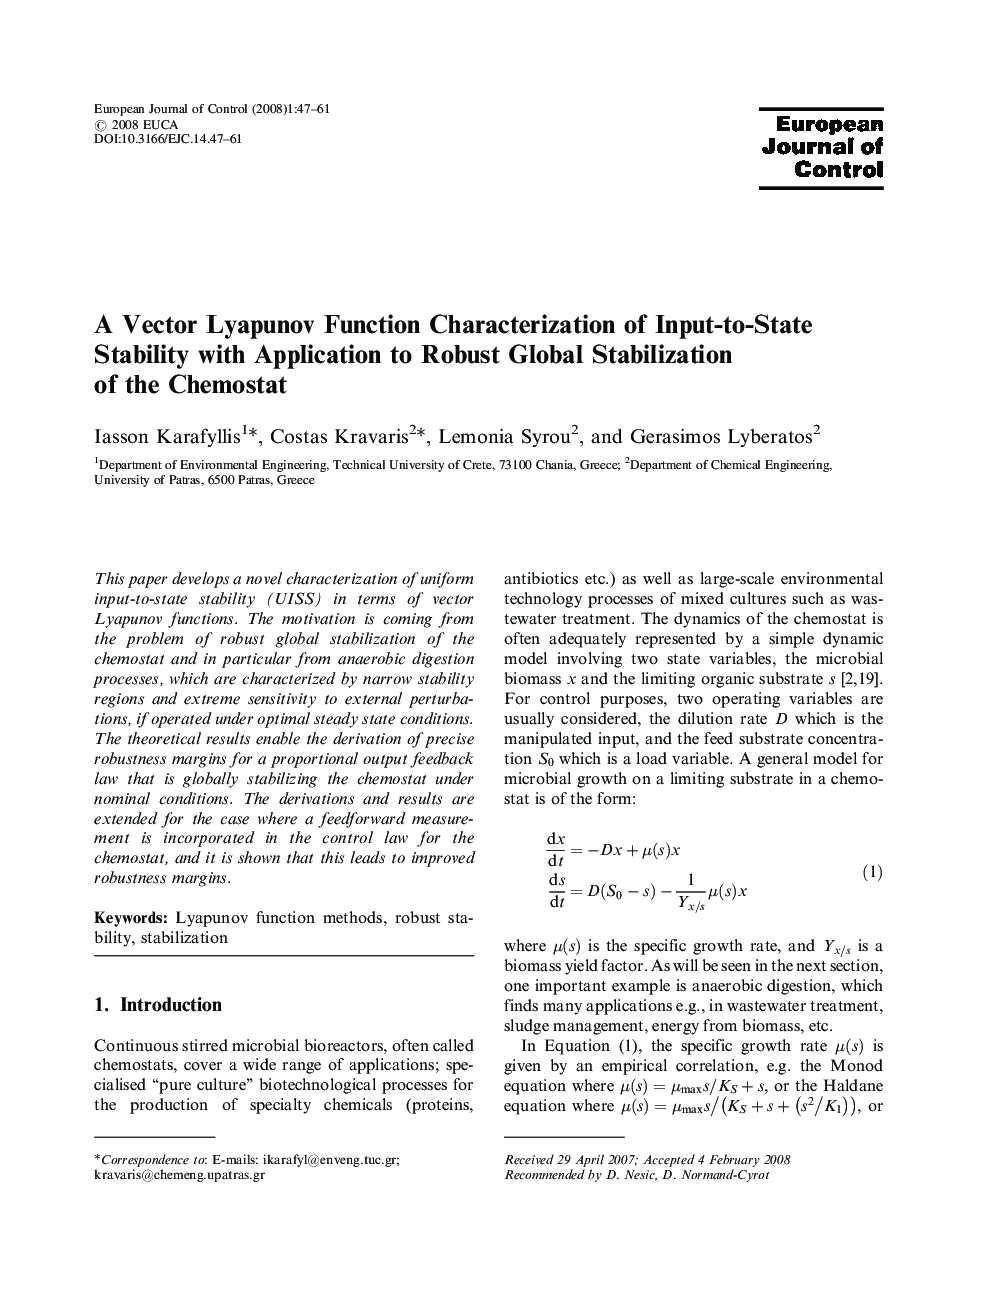 A Vector Lyapunov Function Characterization of Input-to-State Stability with Application to Robust Global Stabilization of the Chemostat